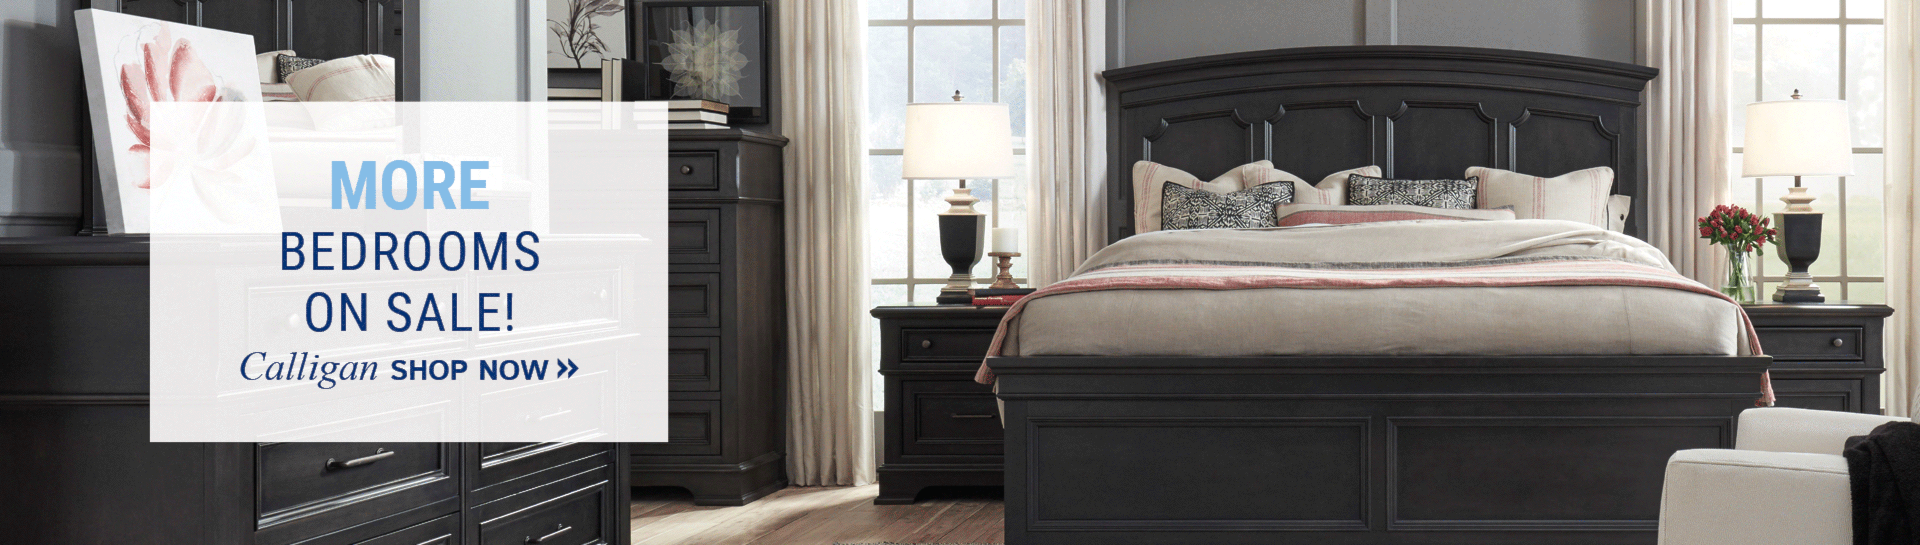 MORE Bedrooms on Sale! Shop Now.